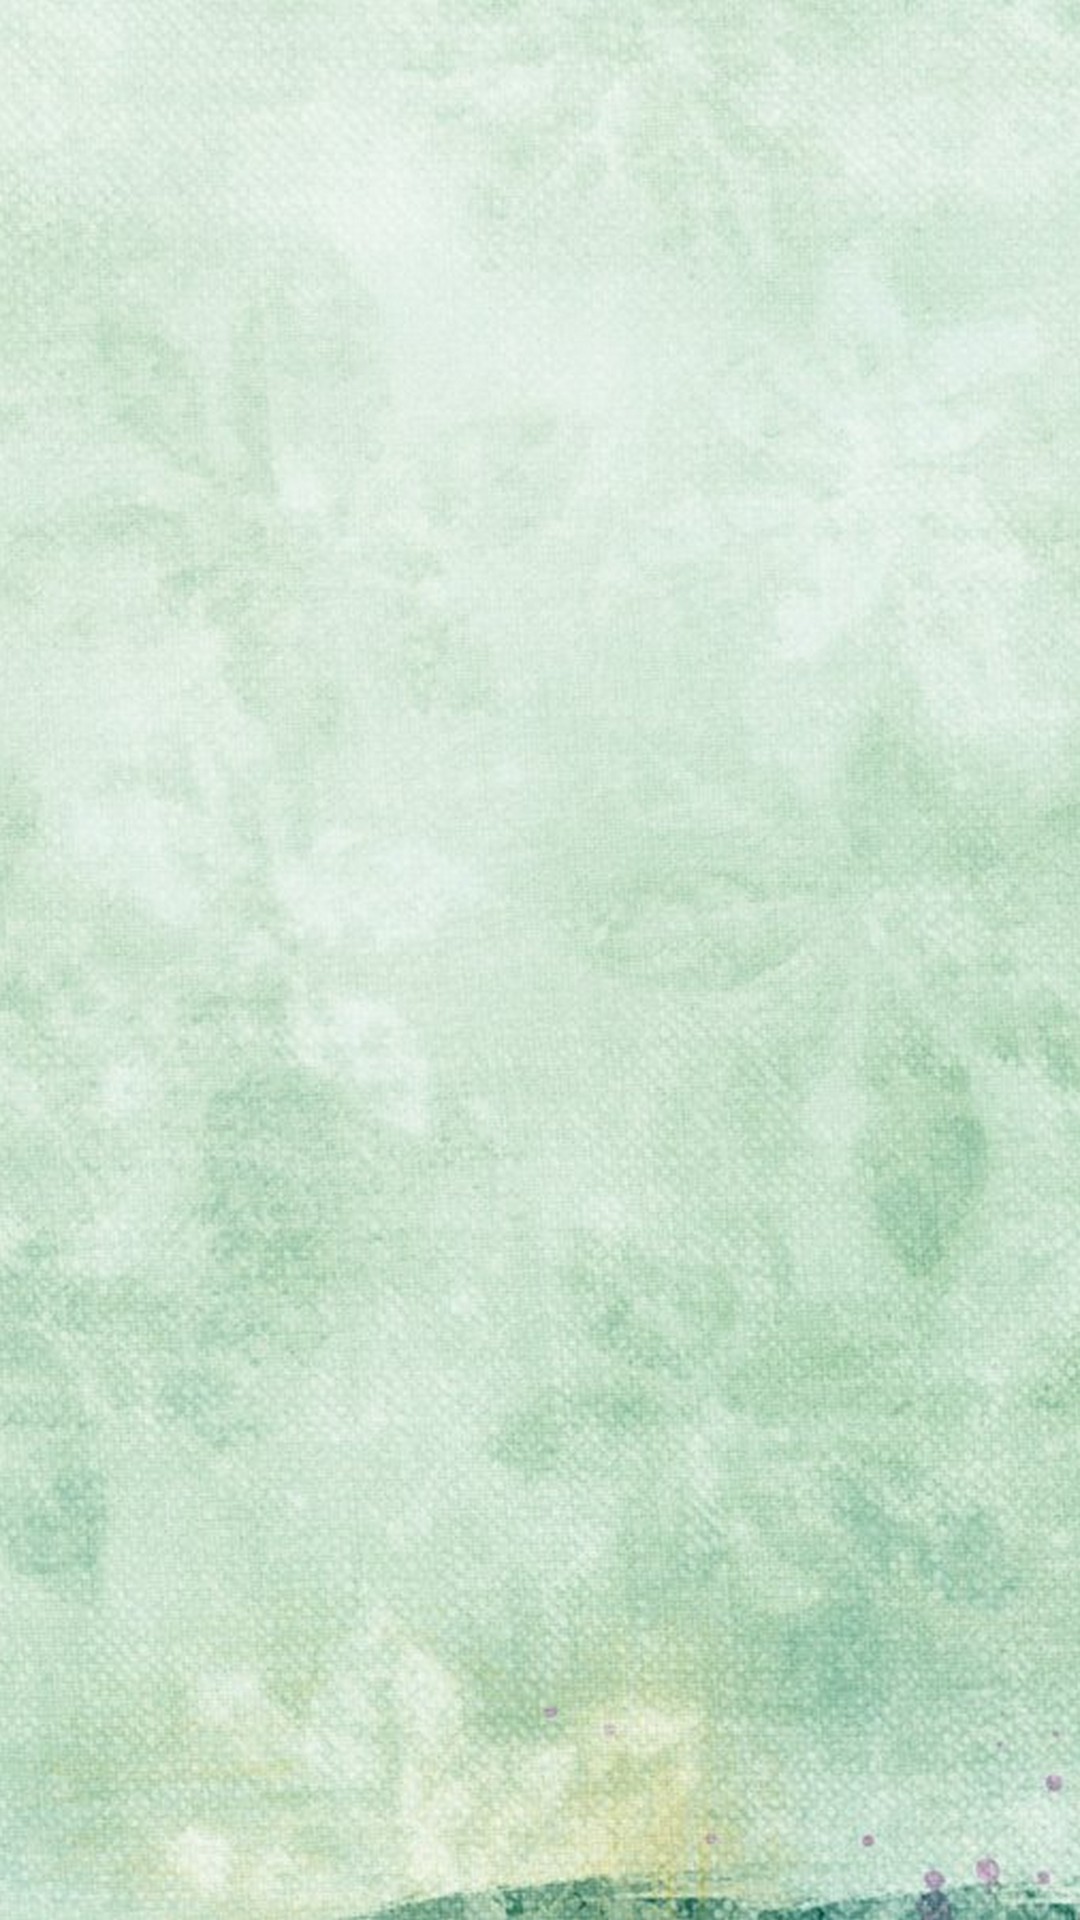 Mint Green Wallpaper For Android with image resolution 1080x1920 pixel. You can make this wallpaper for your Android backgrounds, Tablet, Smartphones Screensavers and Mobile Phone Lock Screen